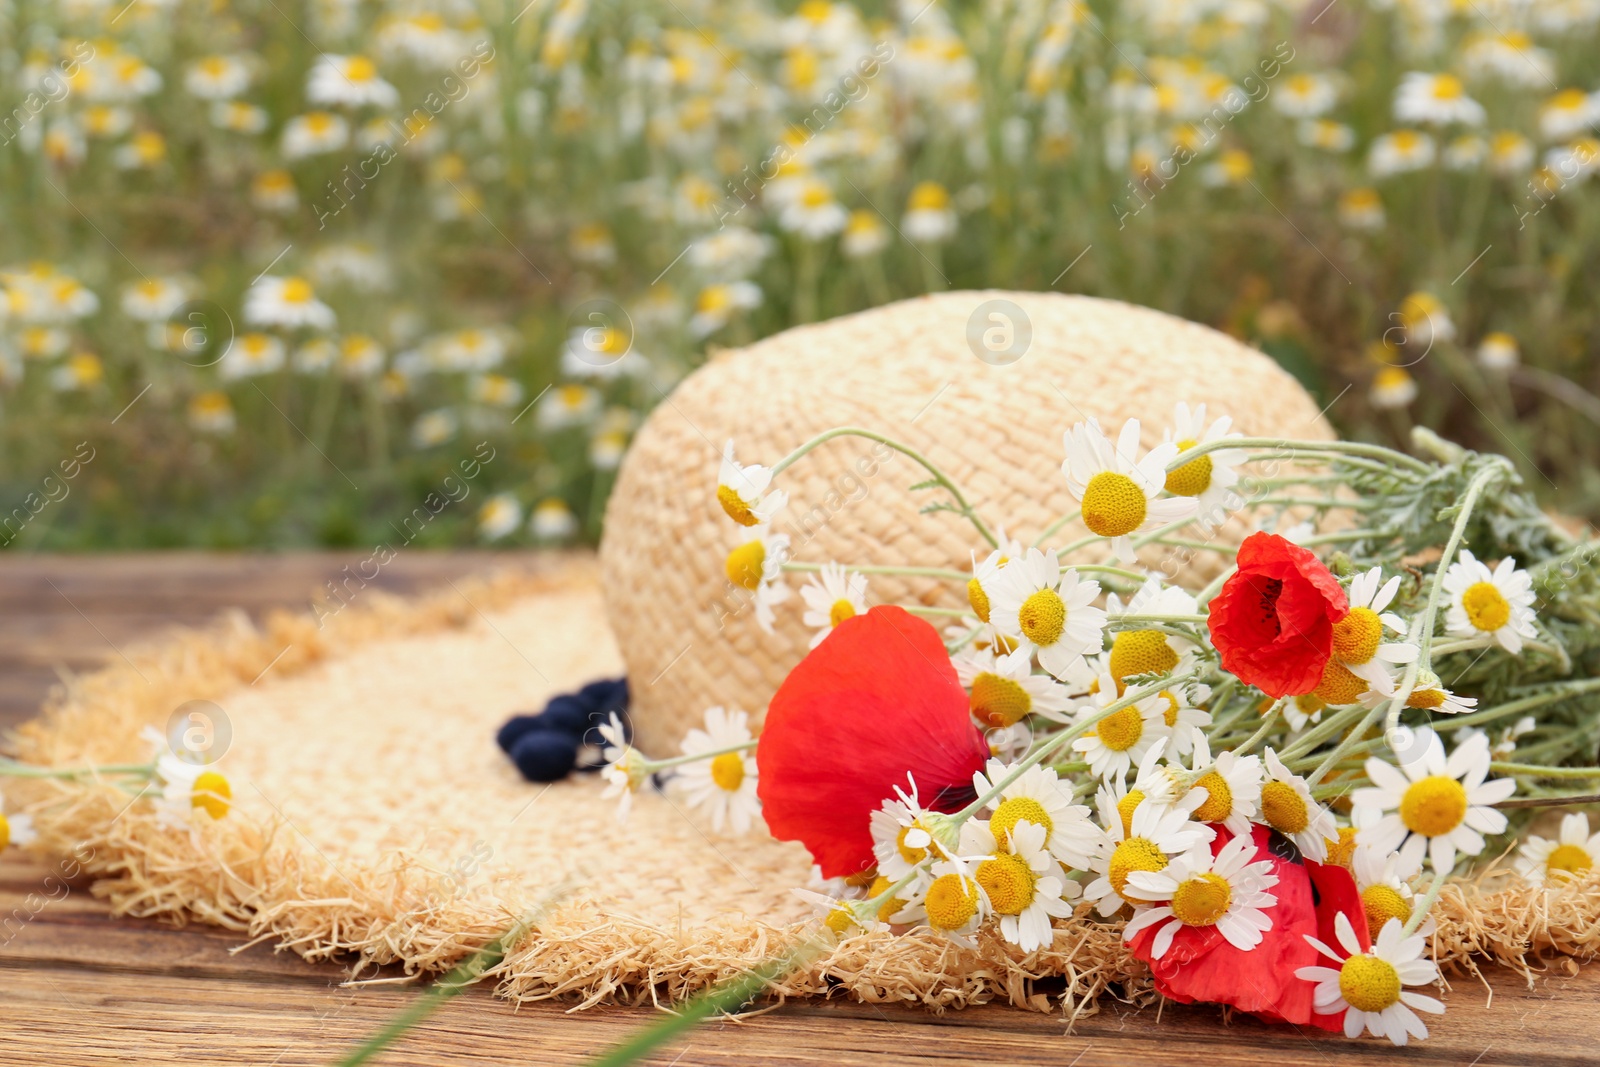 Photo of Bouquet of poppies and chamomiles with straw hat on wooden table outdoors